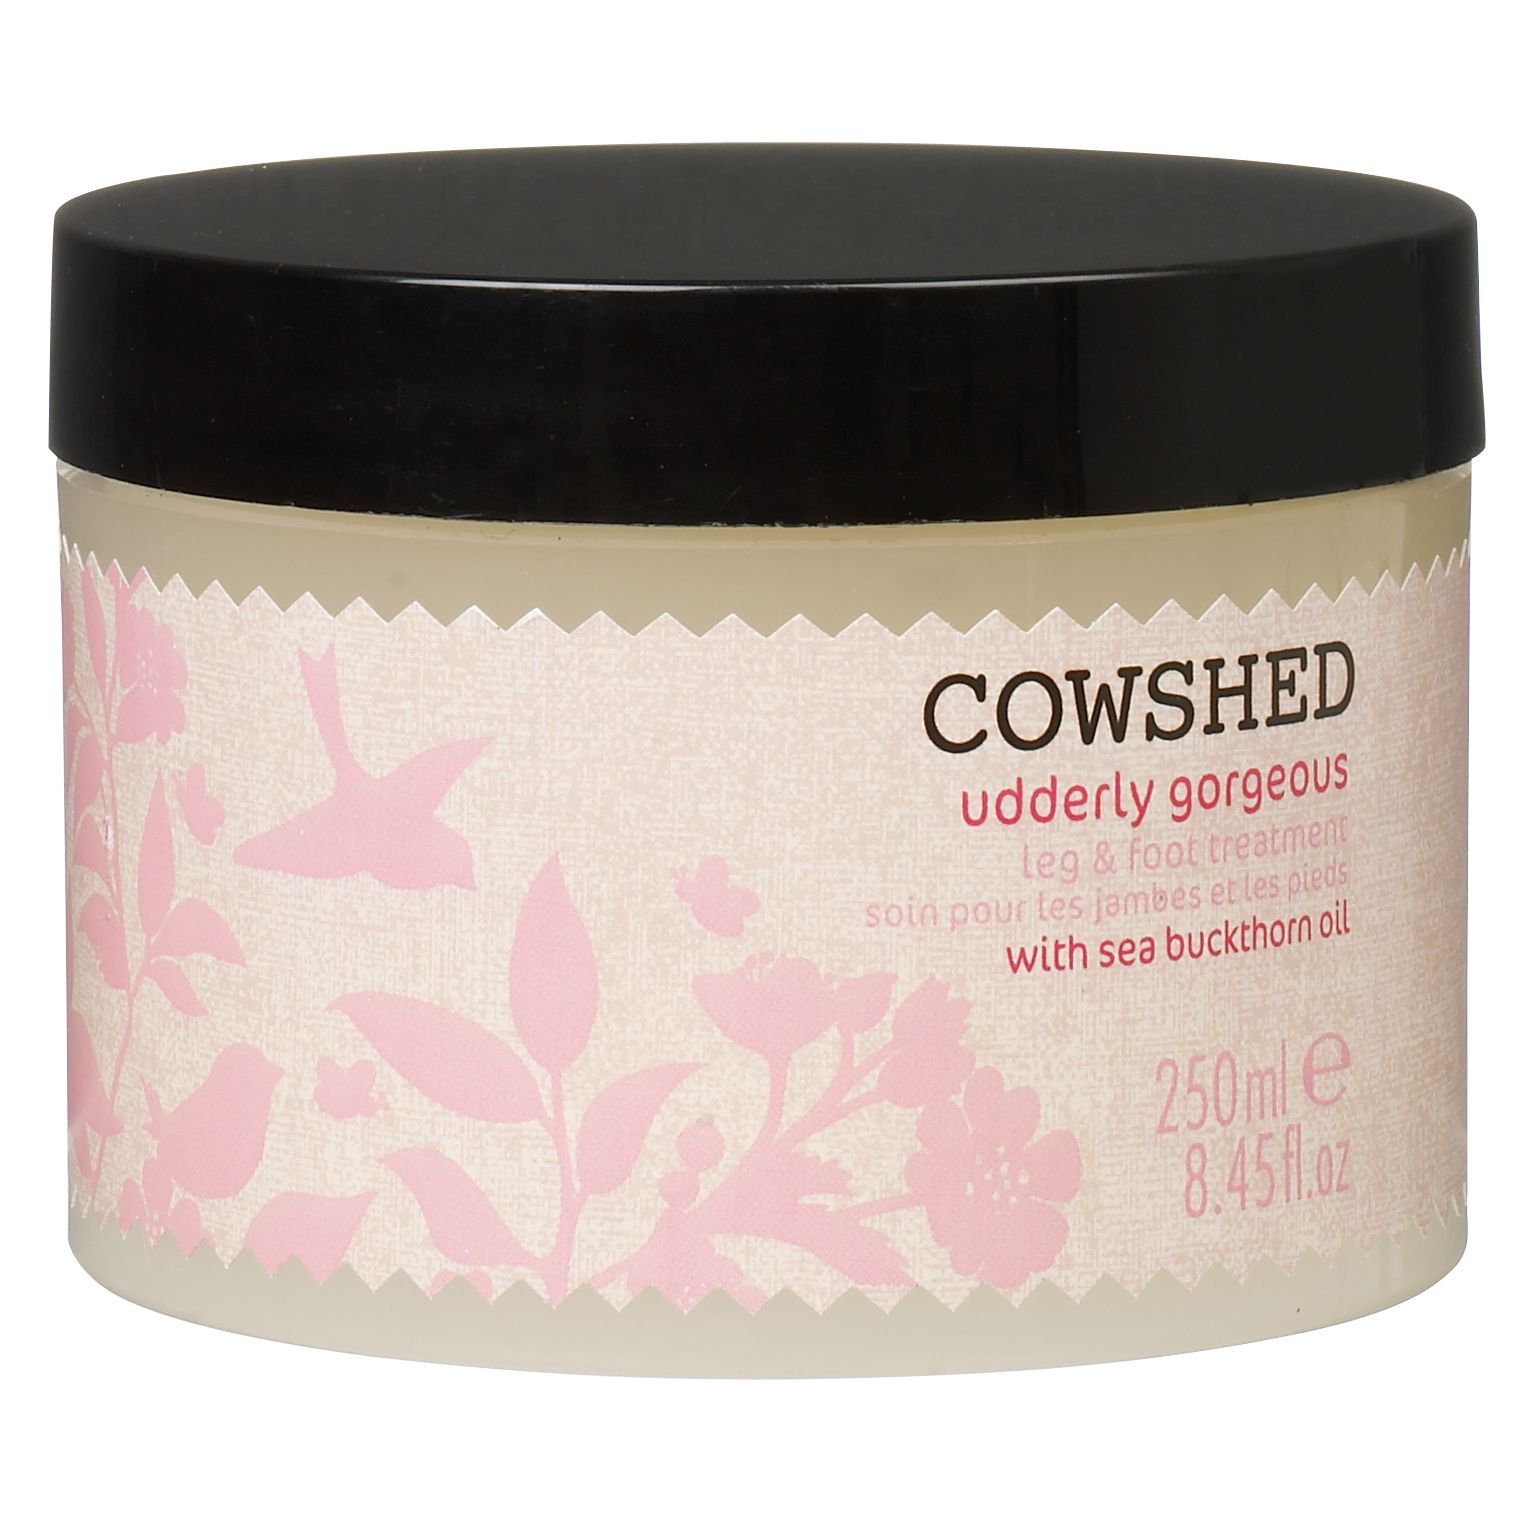 Cowshed Udderly Gorgeous Foot and Leg Treatment,